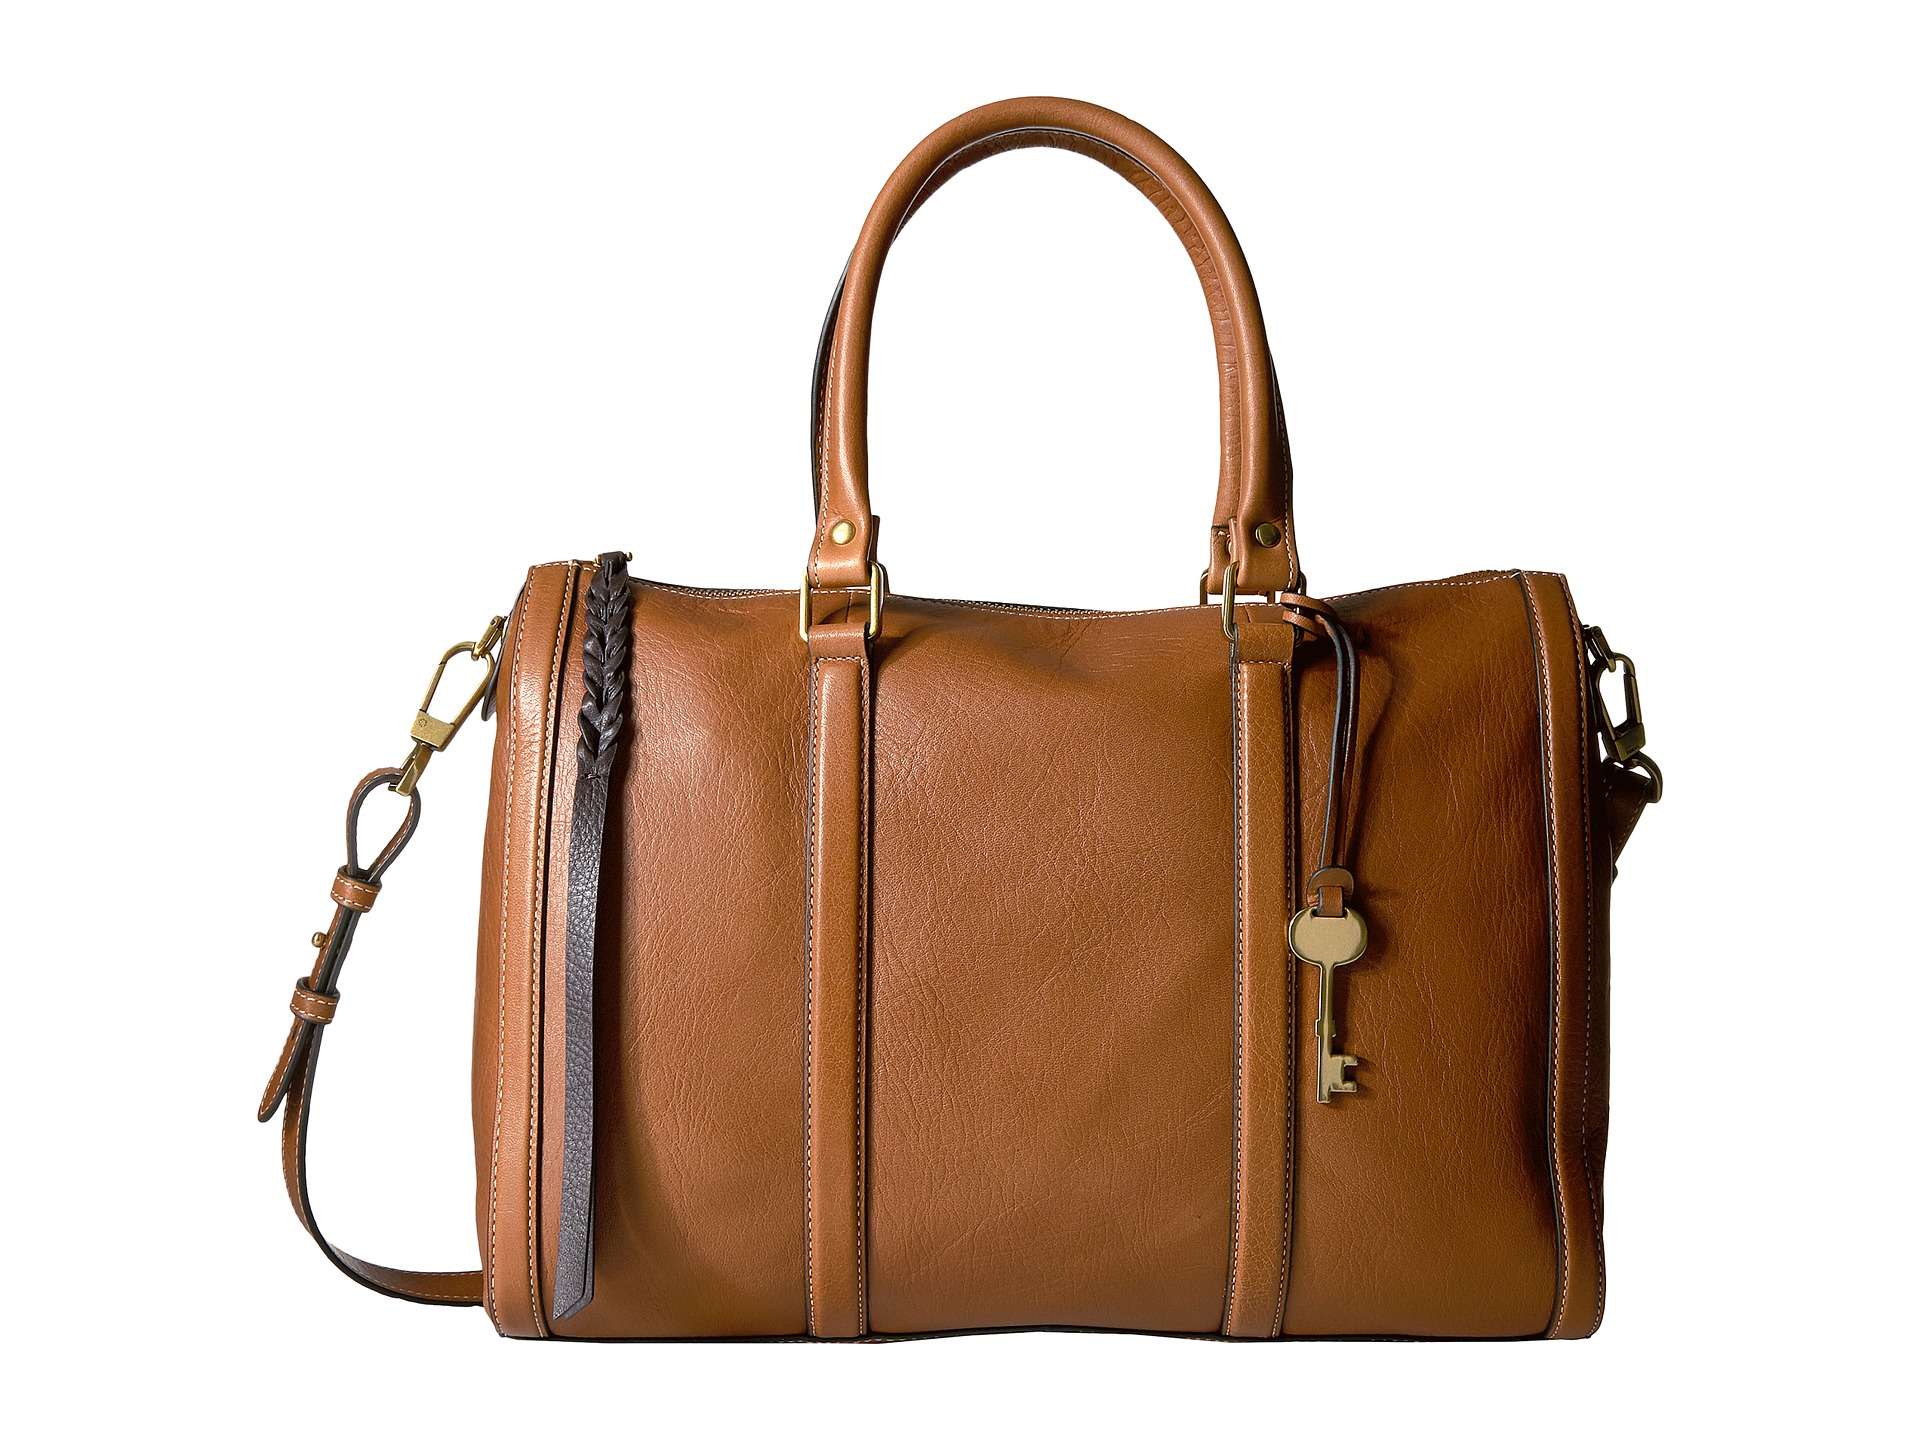 Fossil Kendall Large Satchel at Zappos.com